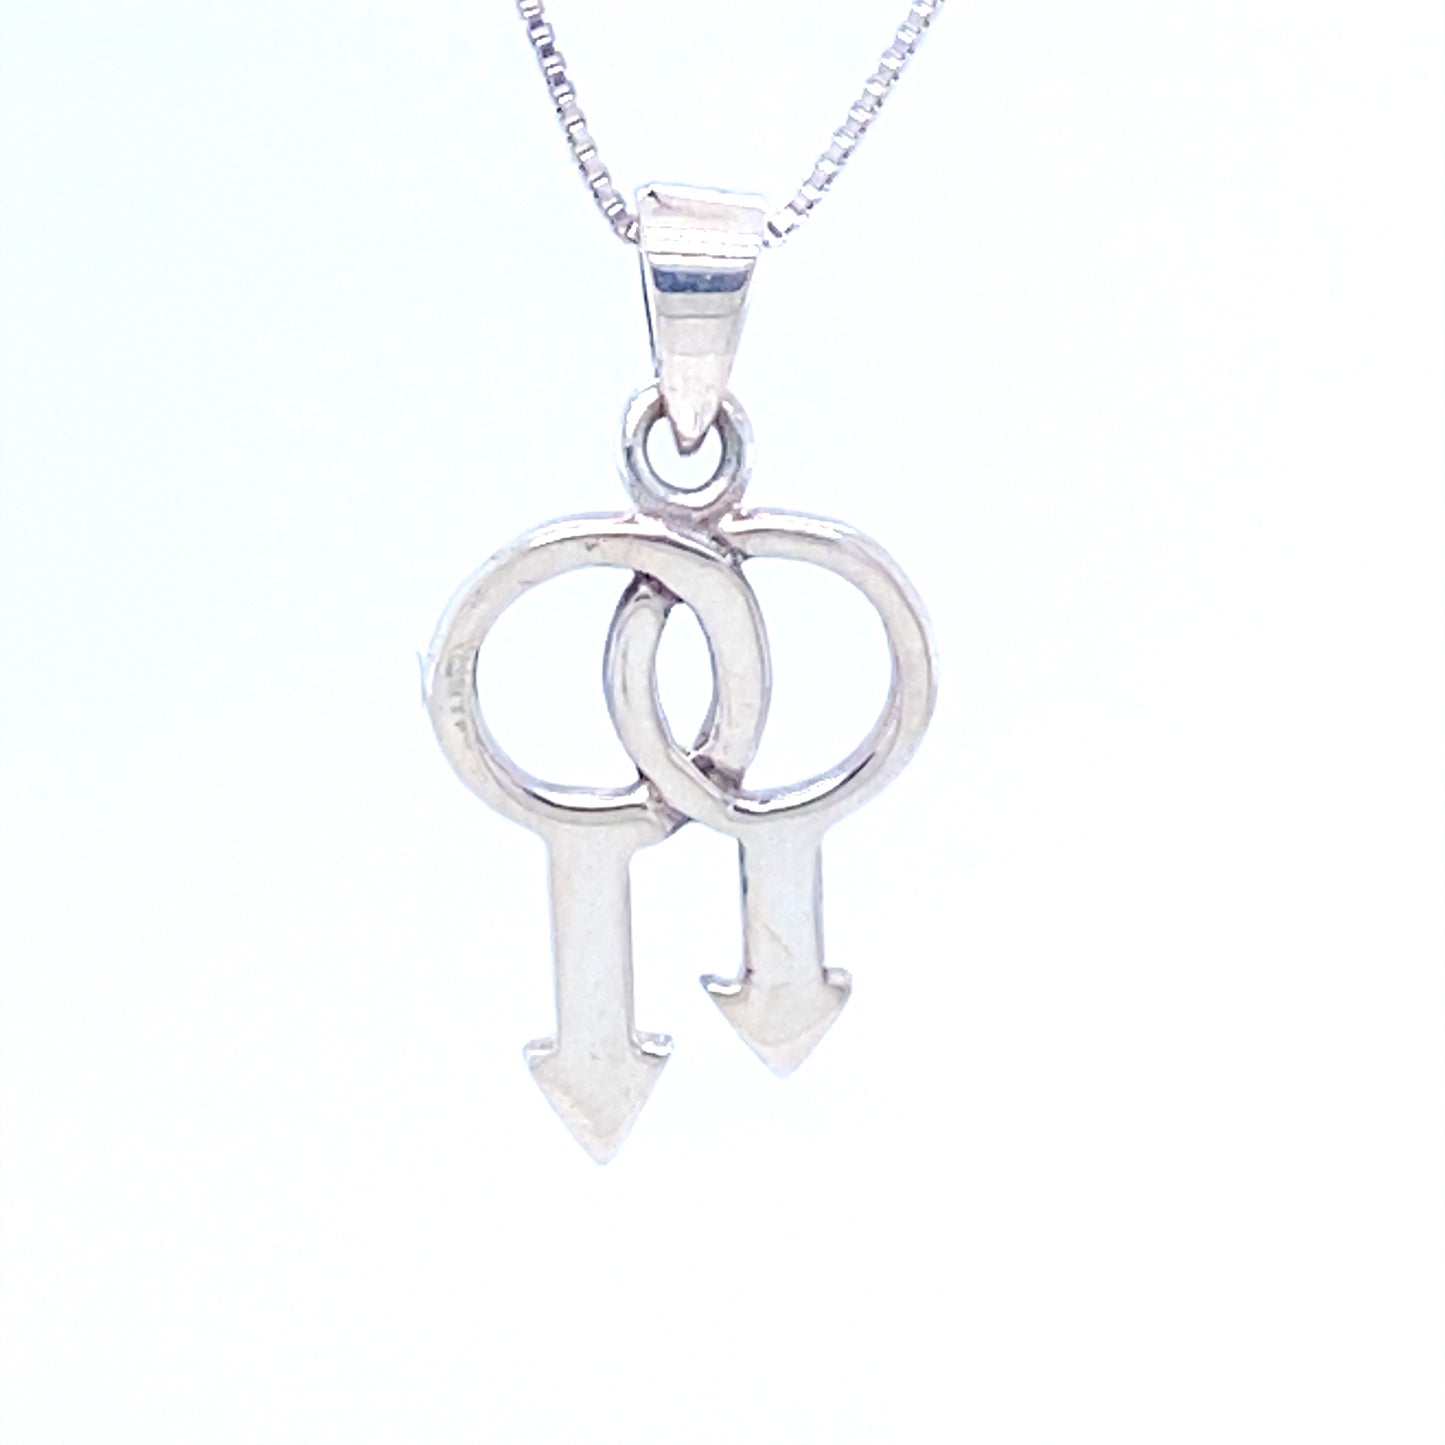 An interlocking Double Mars Charm pendant with male and female symbols on a Super Silver necklace.